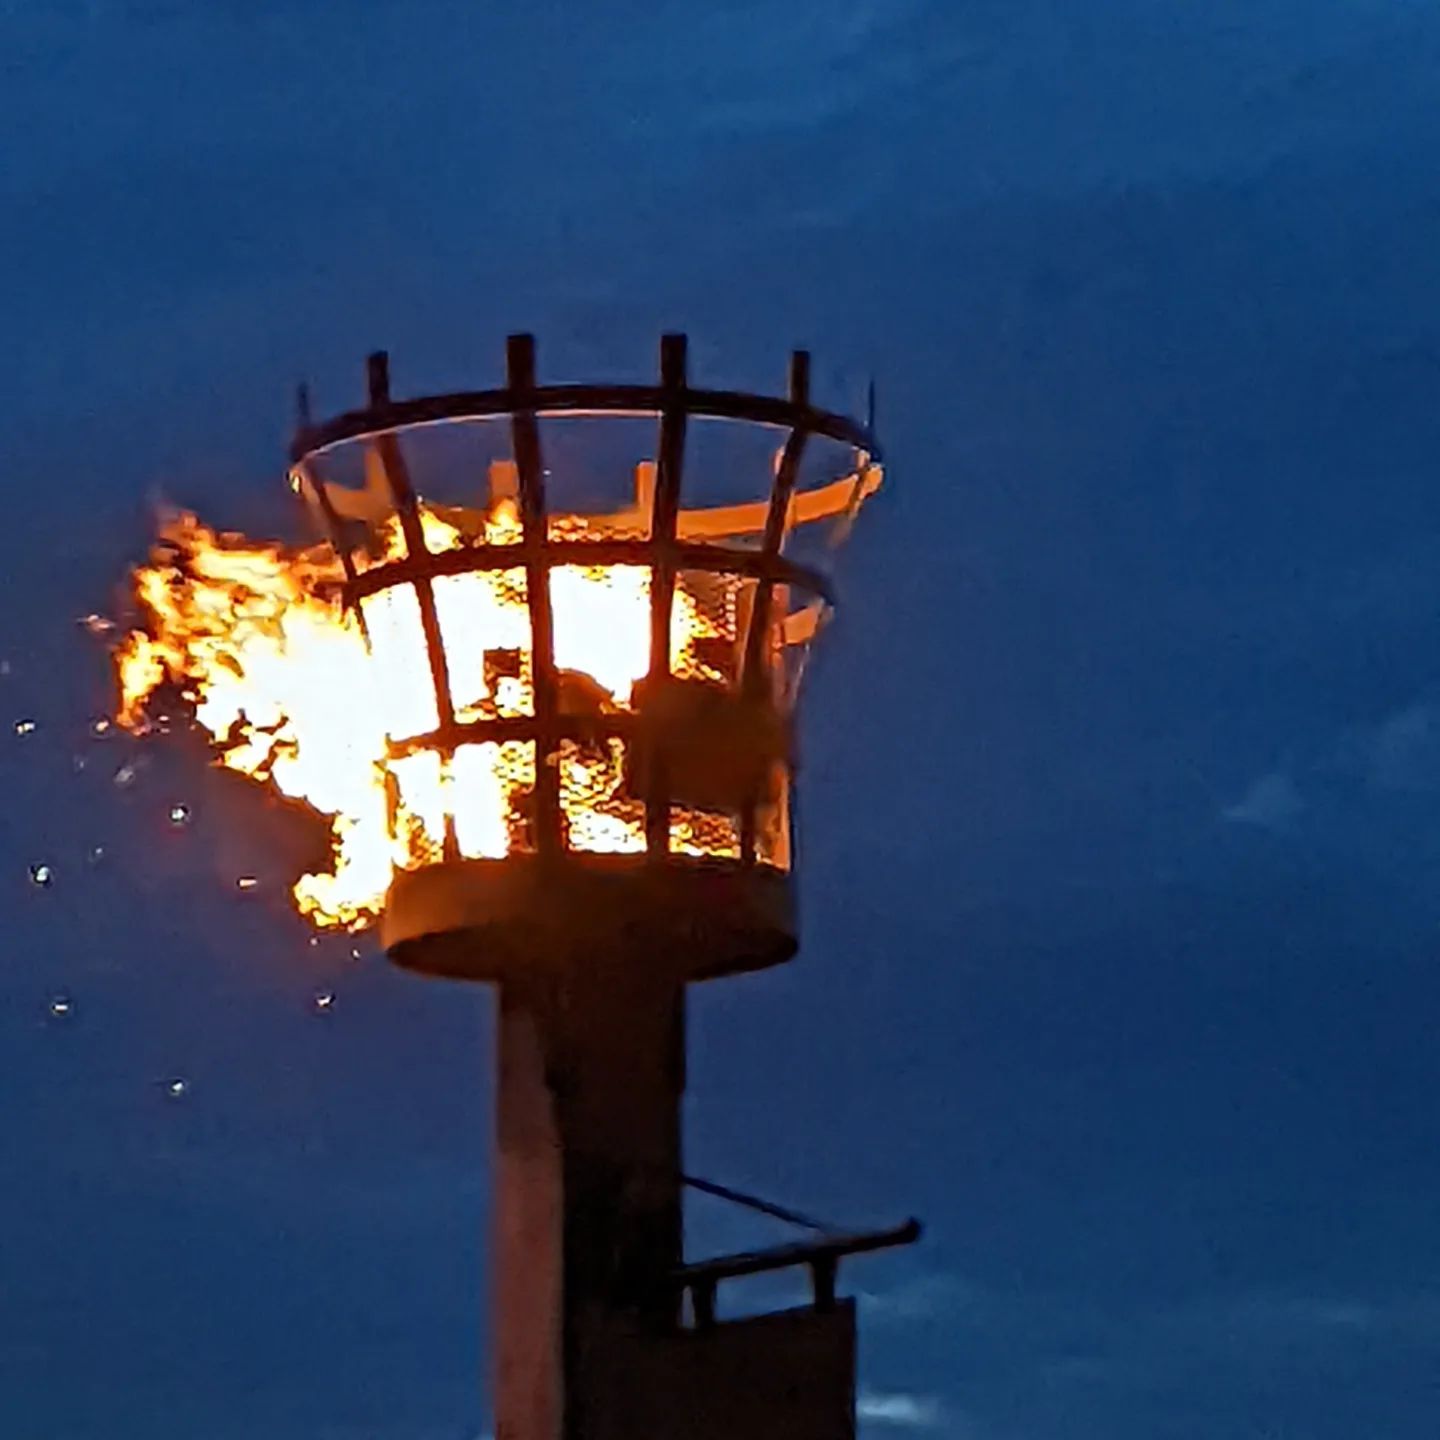 Beautiful evening walk to watch the beacon being lit for the Platinum Jubilee!#beacon #platinumjubilee #fire #sunset #walk #beacons #hrh #jubilee